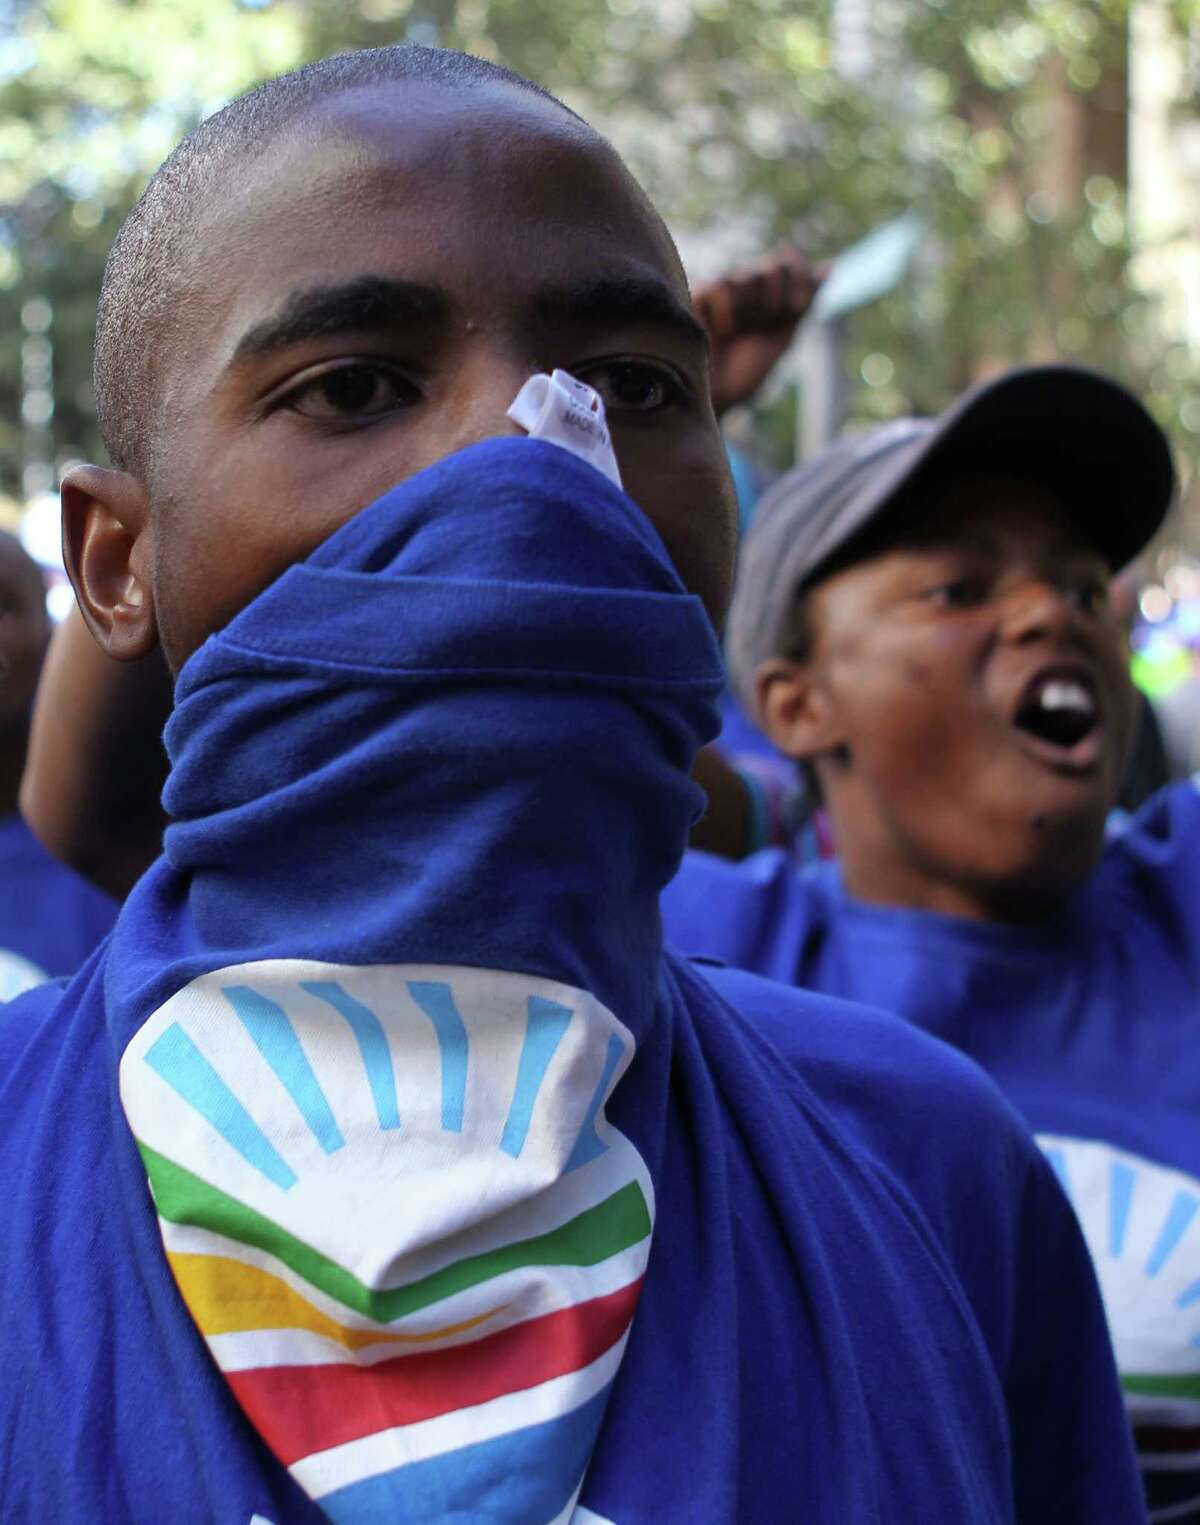 South Africa's opposition party Democratic Alliance (DA) supporters during their protest march against the Congress of South African Trade Unions (Cosatu) for opposing the youth wage subsidy in Johannesburg, South Africa on Tuesday May 15, 2012. An opposition party march in Johannesburg turned violent Tuesday after union supporters hurled rocks at the leader of South Africa's main opposition party. (AP Photo/Themba Hadebe)